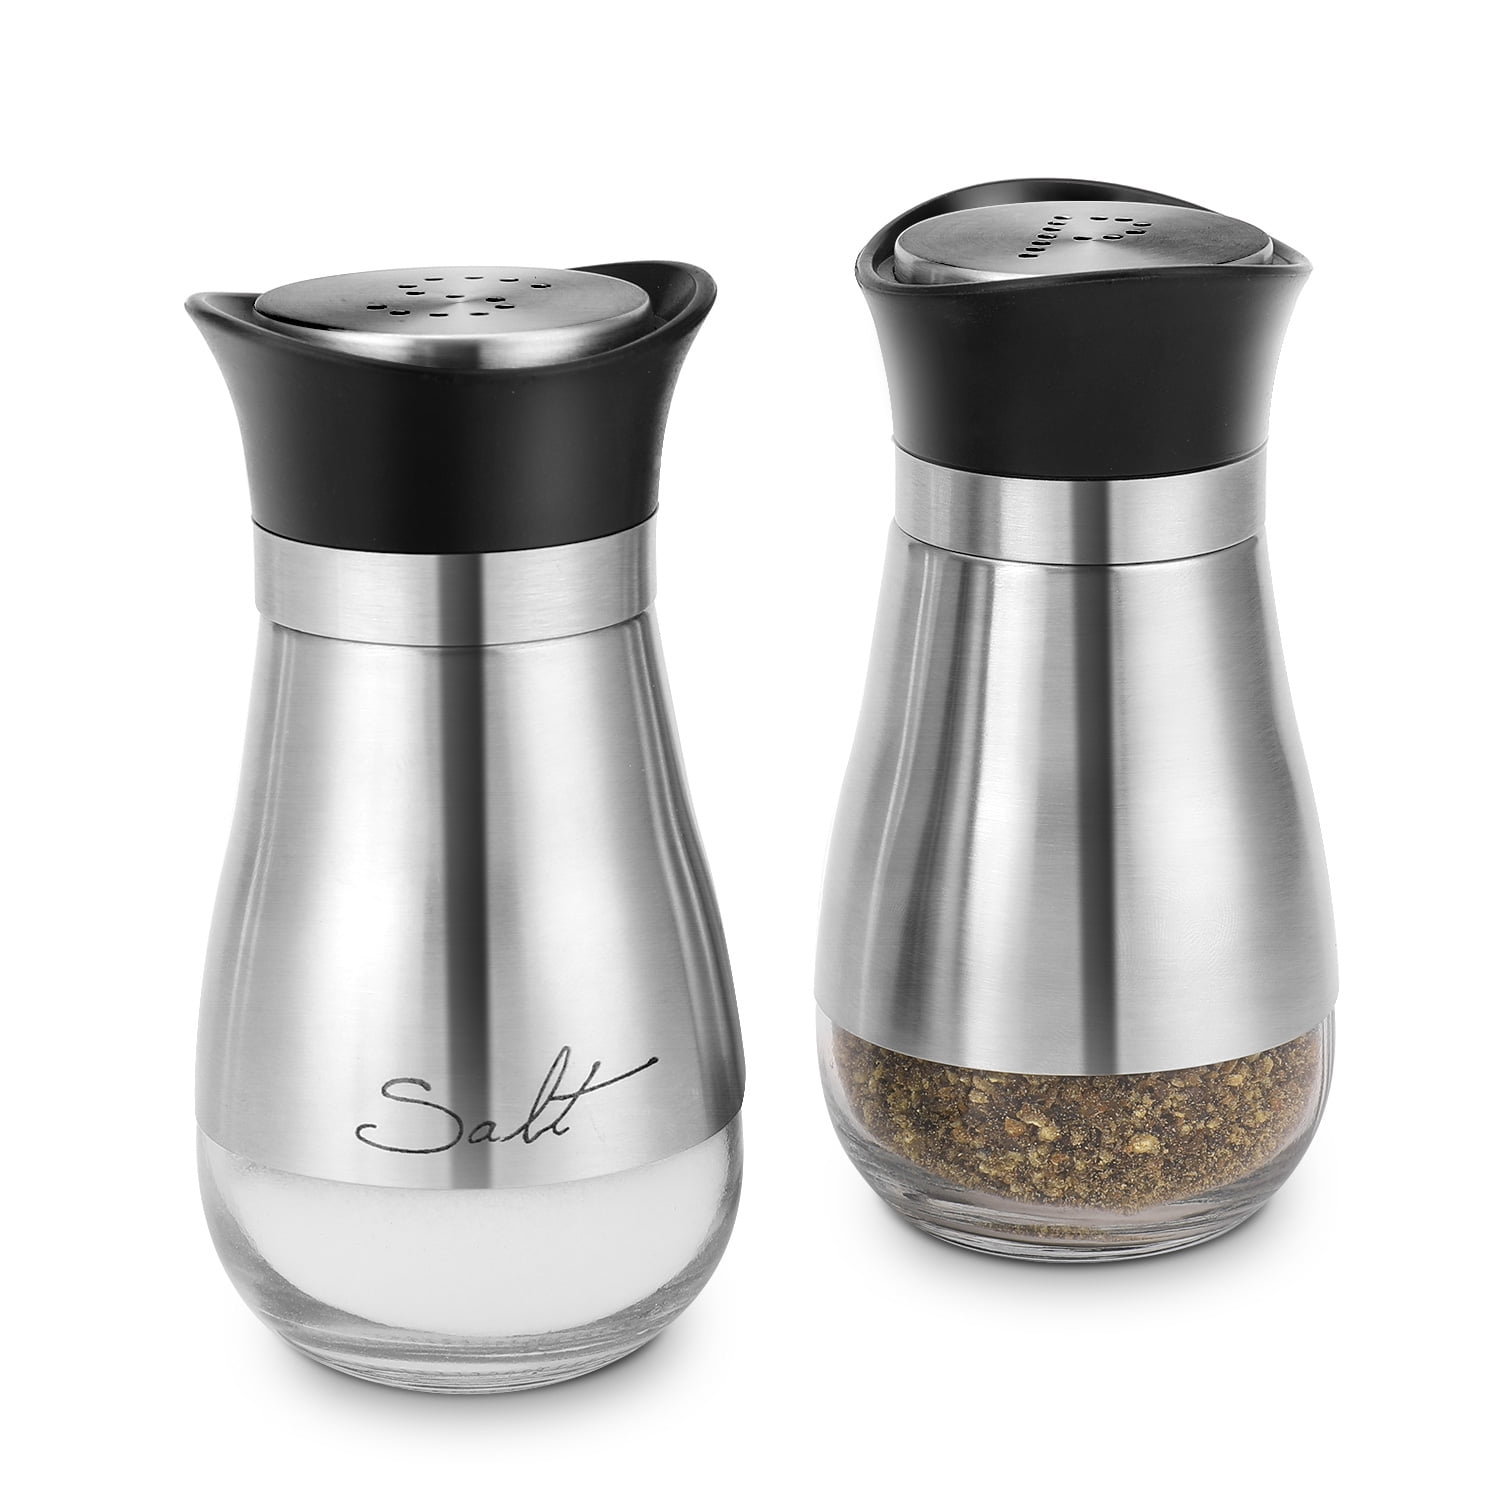 Stainless Steel Silver Salt Pepper Shaker Portable Home Travel Accessory Indoor